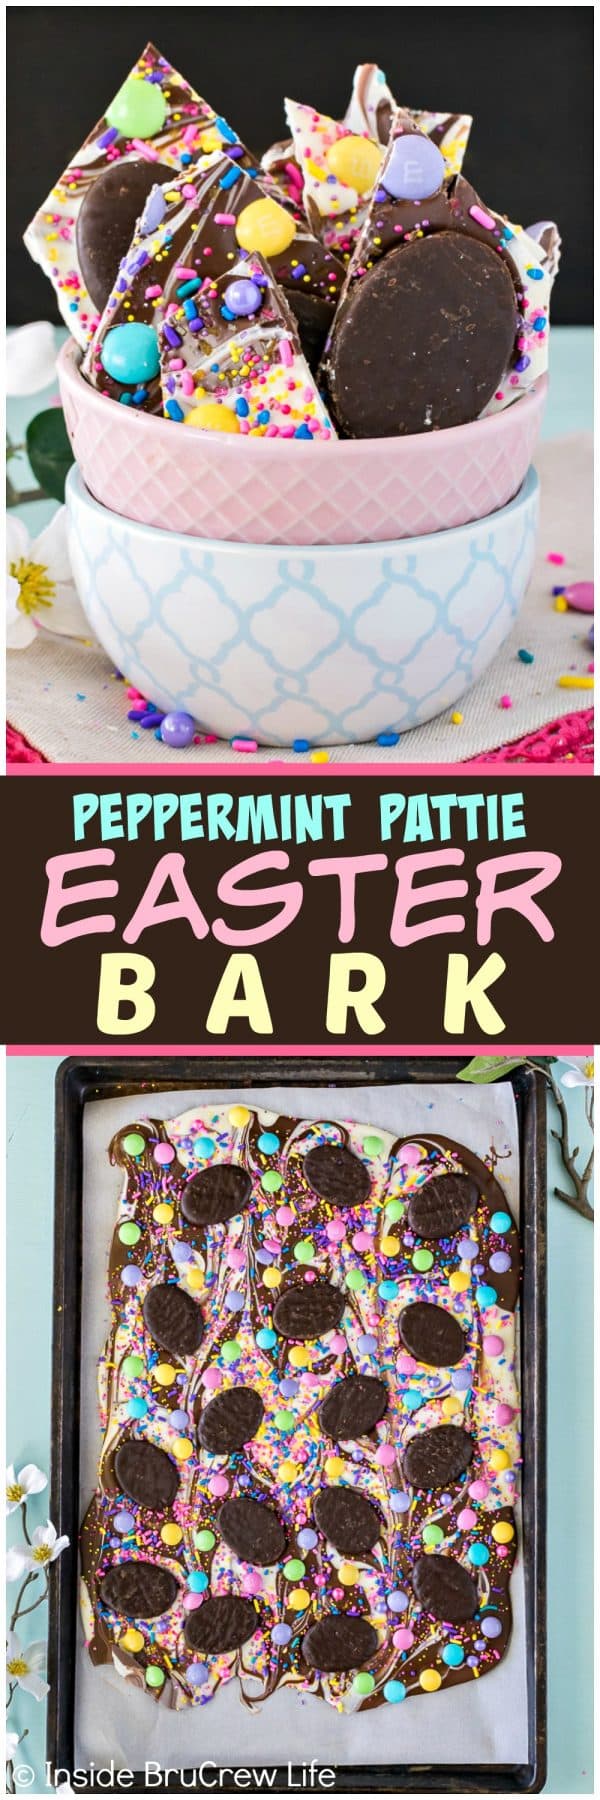 2 pictures of peppermint patty bark covered in chocolate and Easter sprinkles.